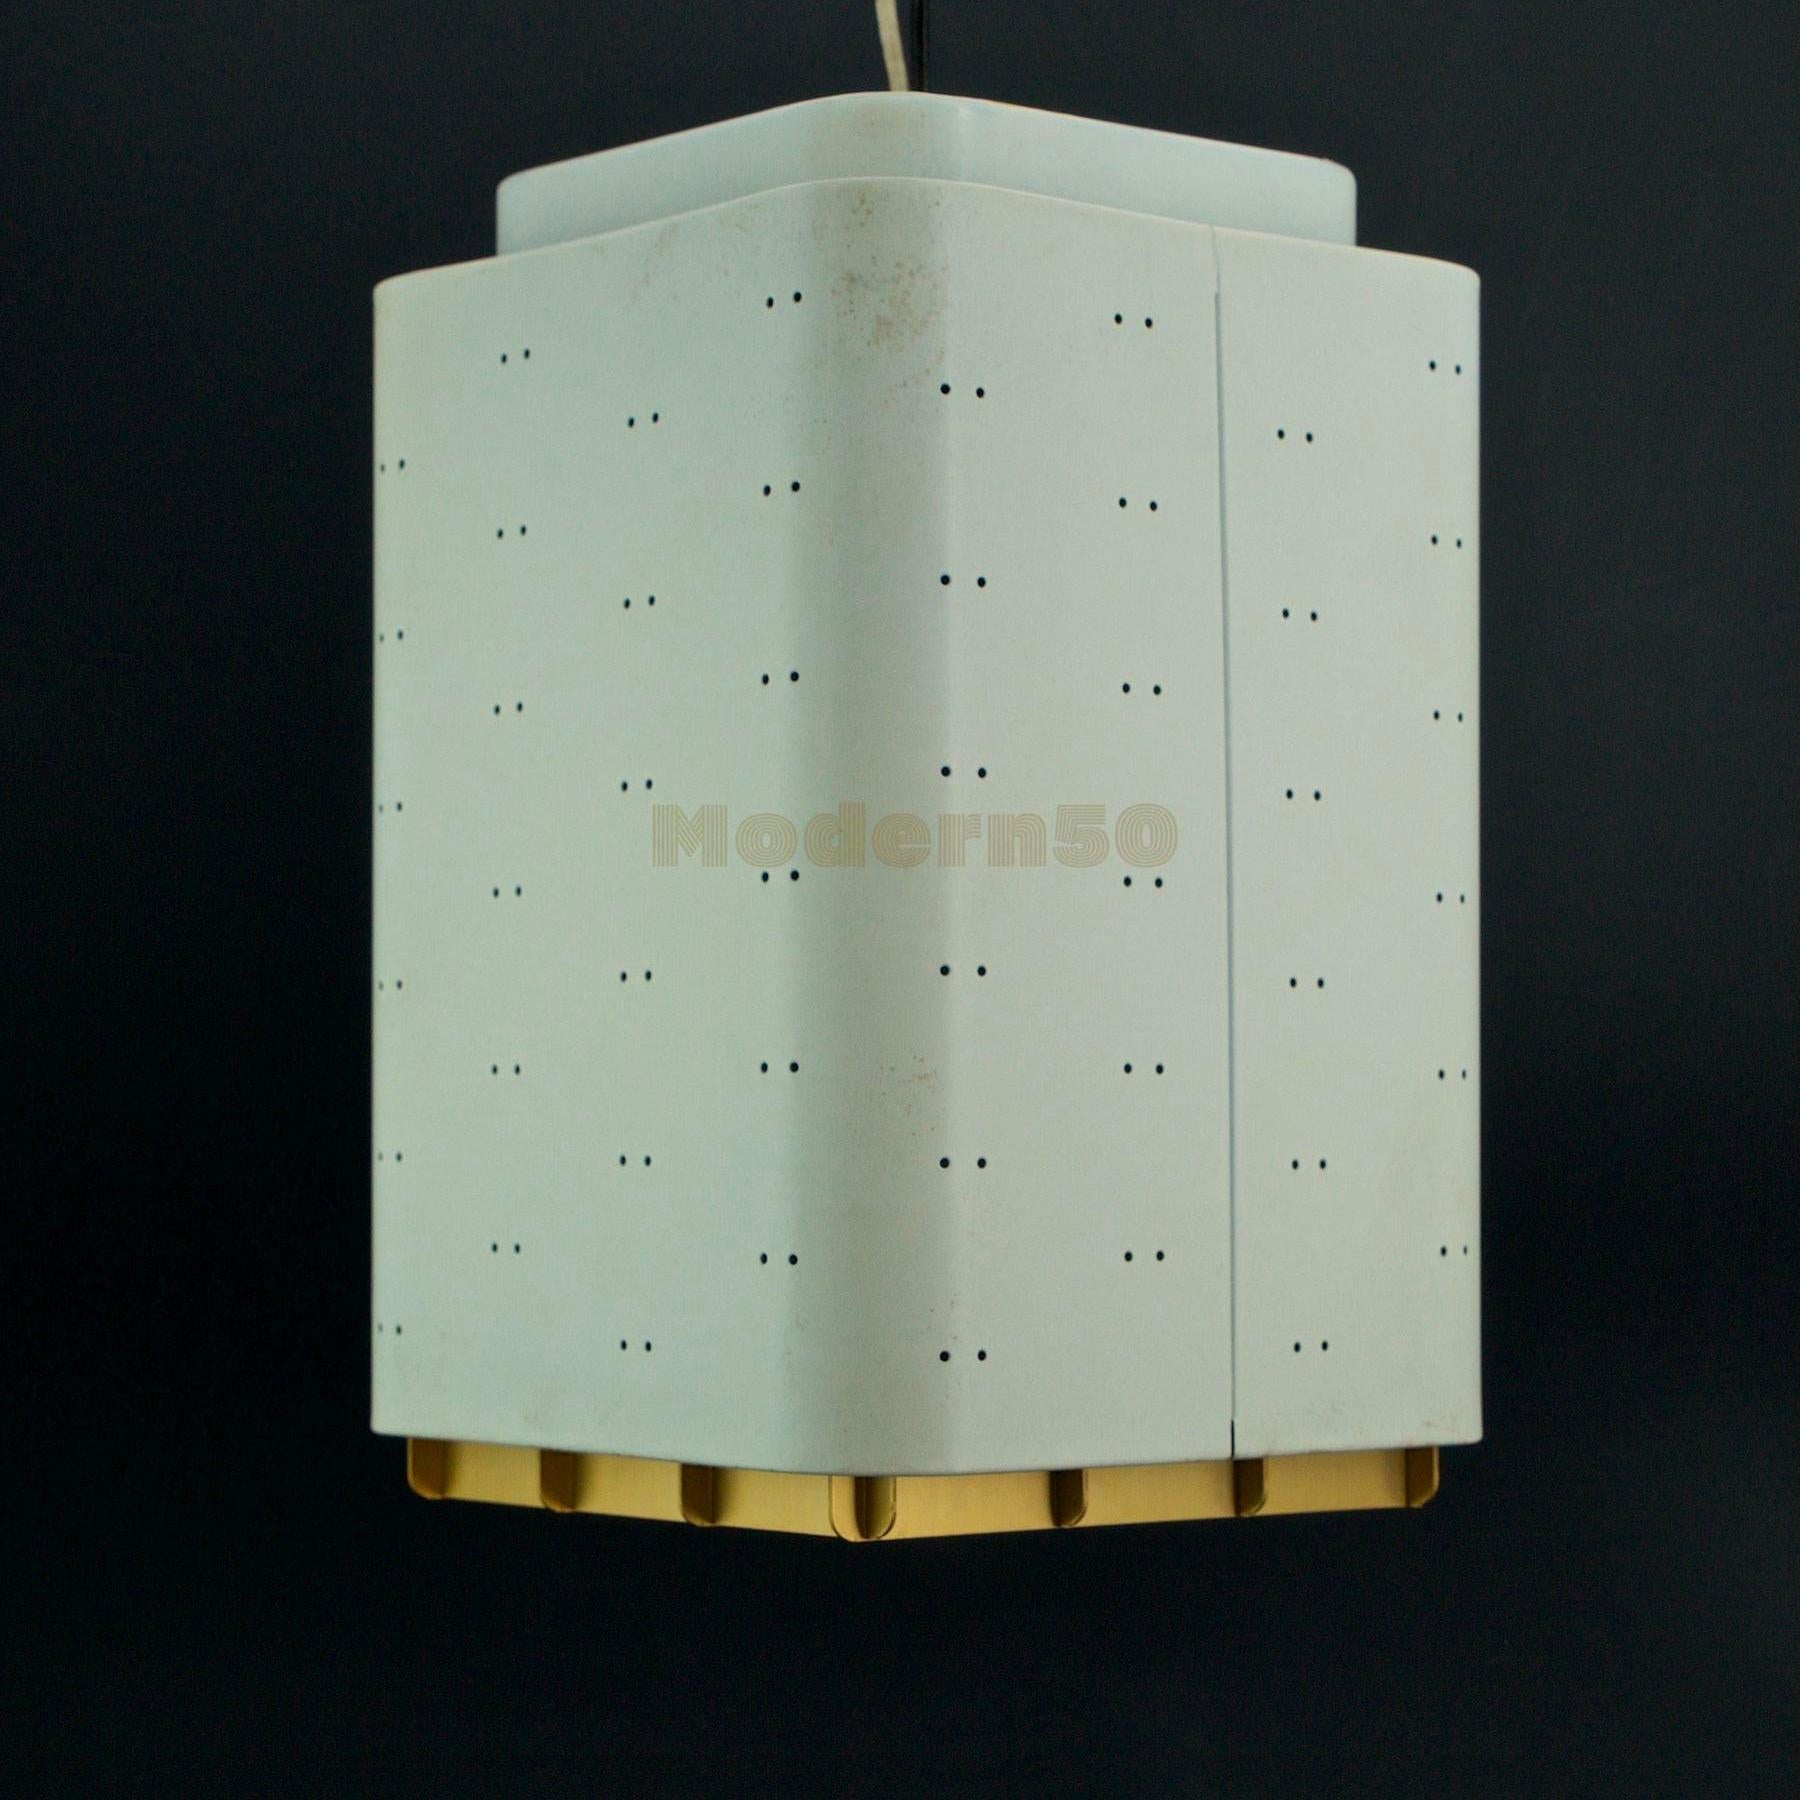 US WIRED, from a Washington DC estate.

Rare ceiling downlight, or could be outfitted to be hung as a pendant. This is a USA Lightolier version uses an anodized aluminum grate diffuser, and a double seams pierced off-white painted housing.